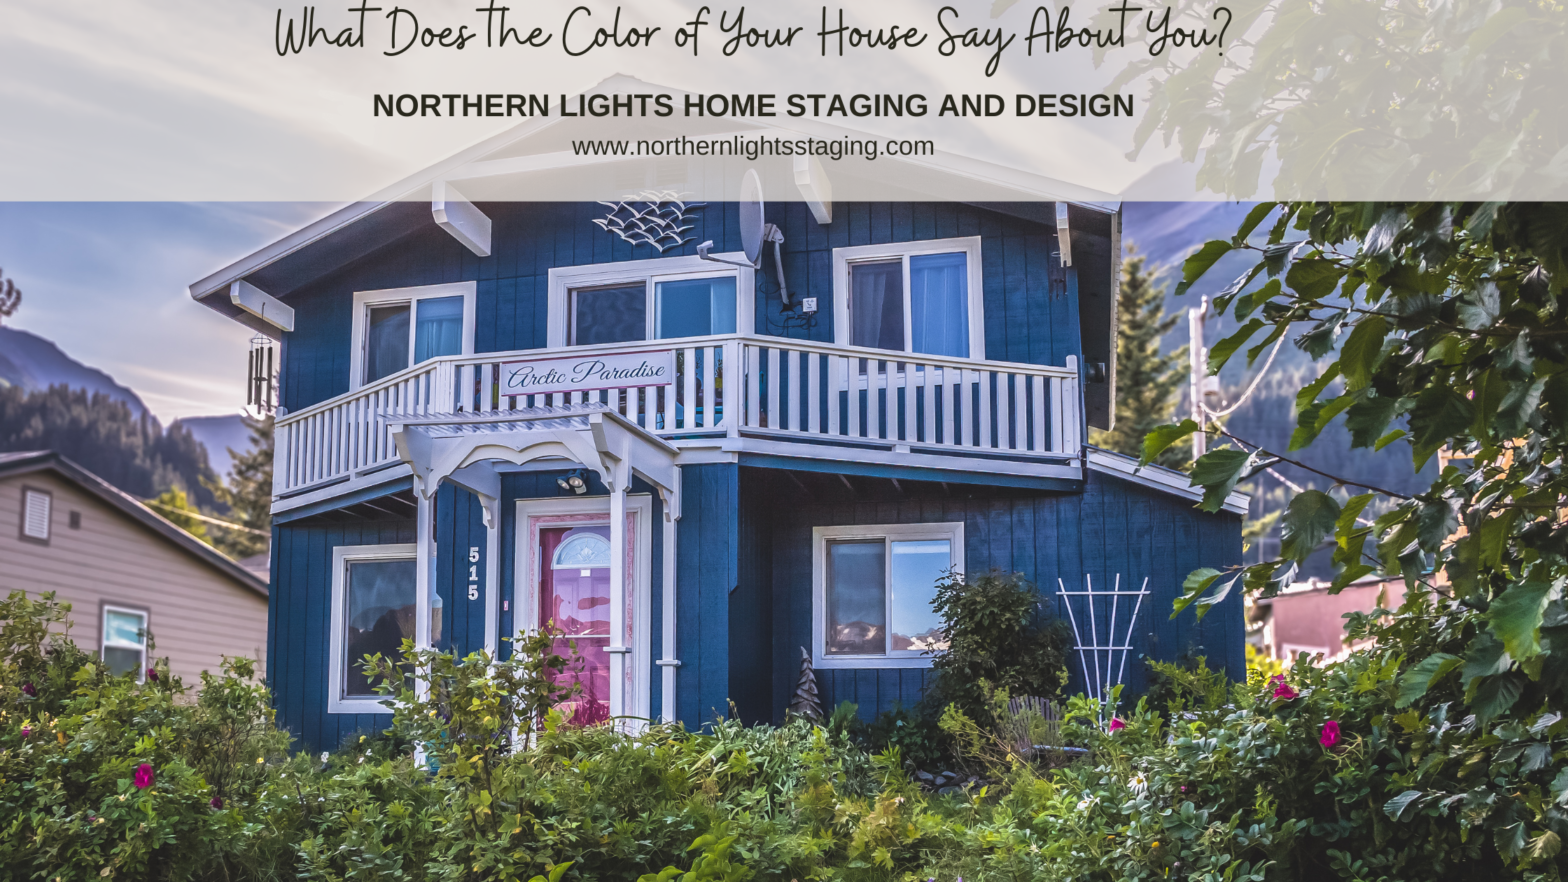 What does the color of your house say about you? Pick paint colors that tell your story. Get help from a certified color strategist that uses both the art and science of color. Northern Lights Home Staging and Design.